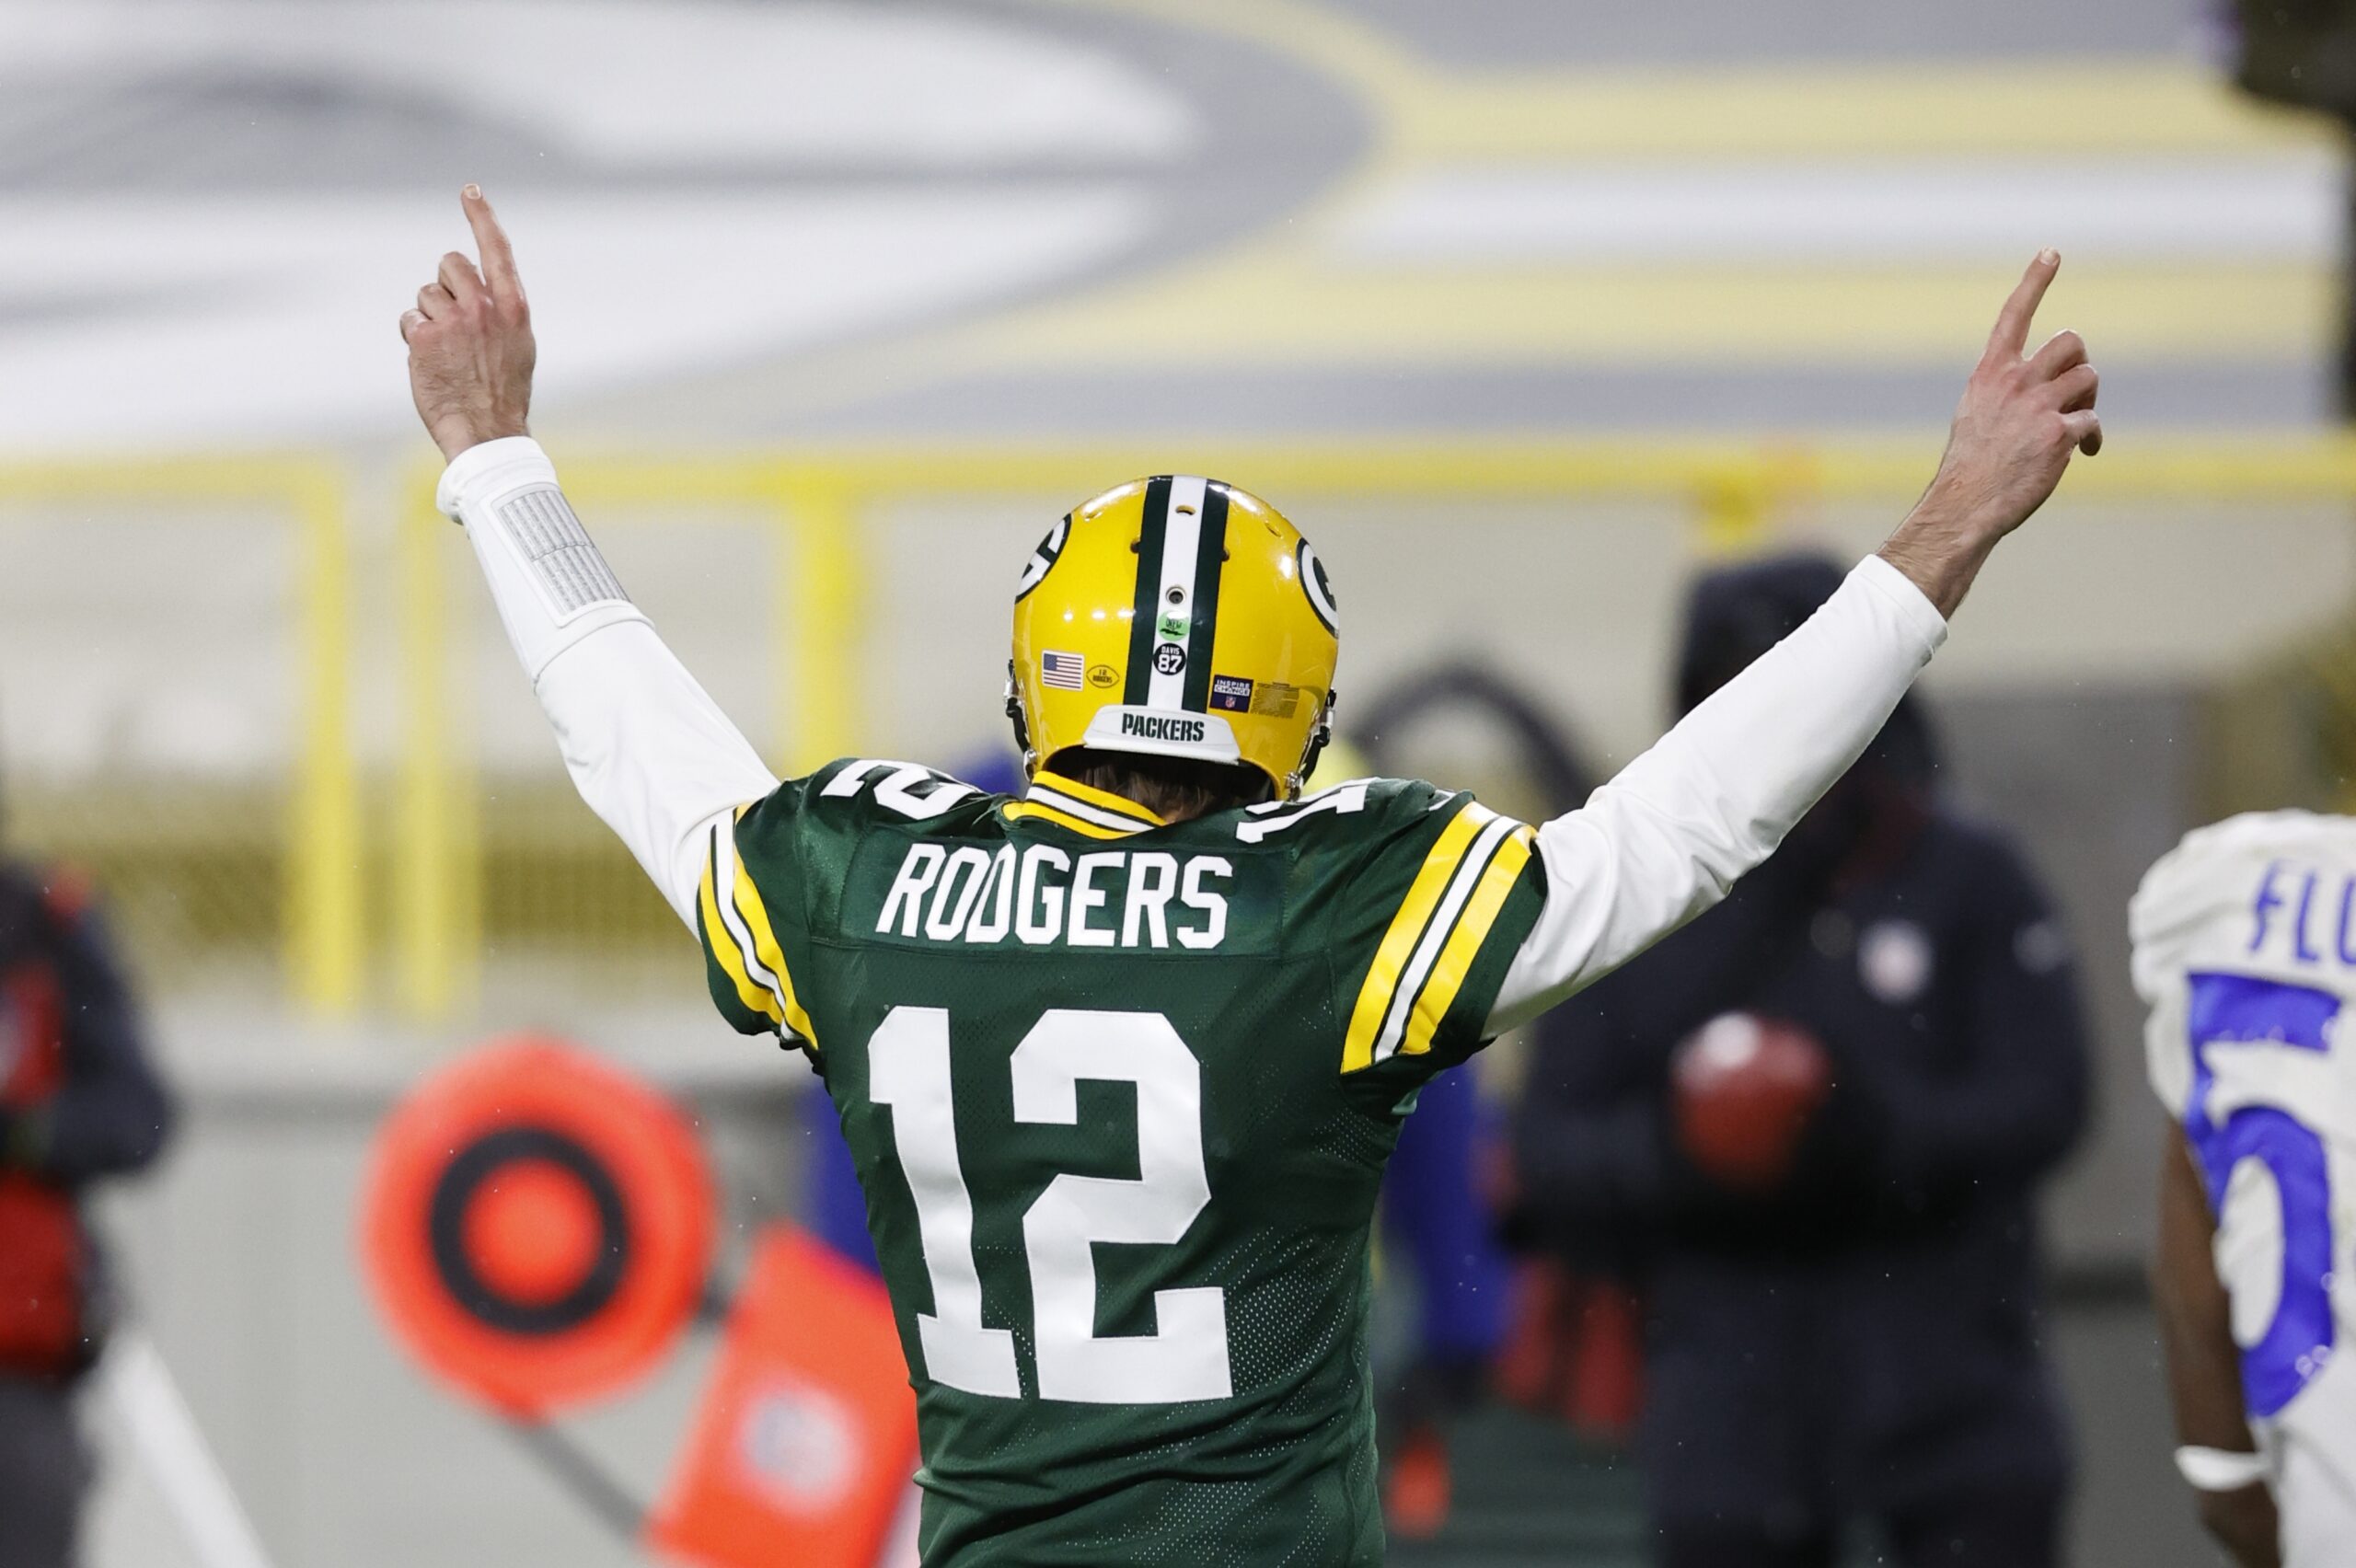 Aaron Rodgers celebrates by raising his arms during a playoff game at Lambeau Field